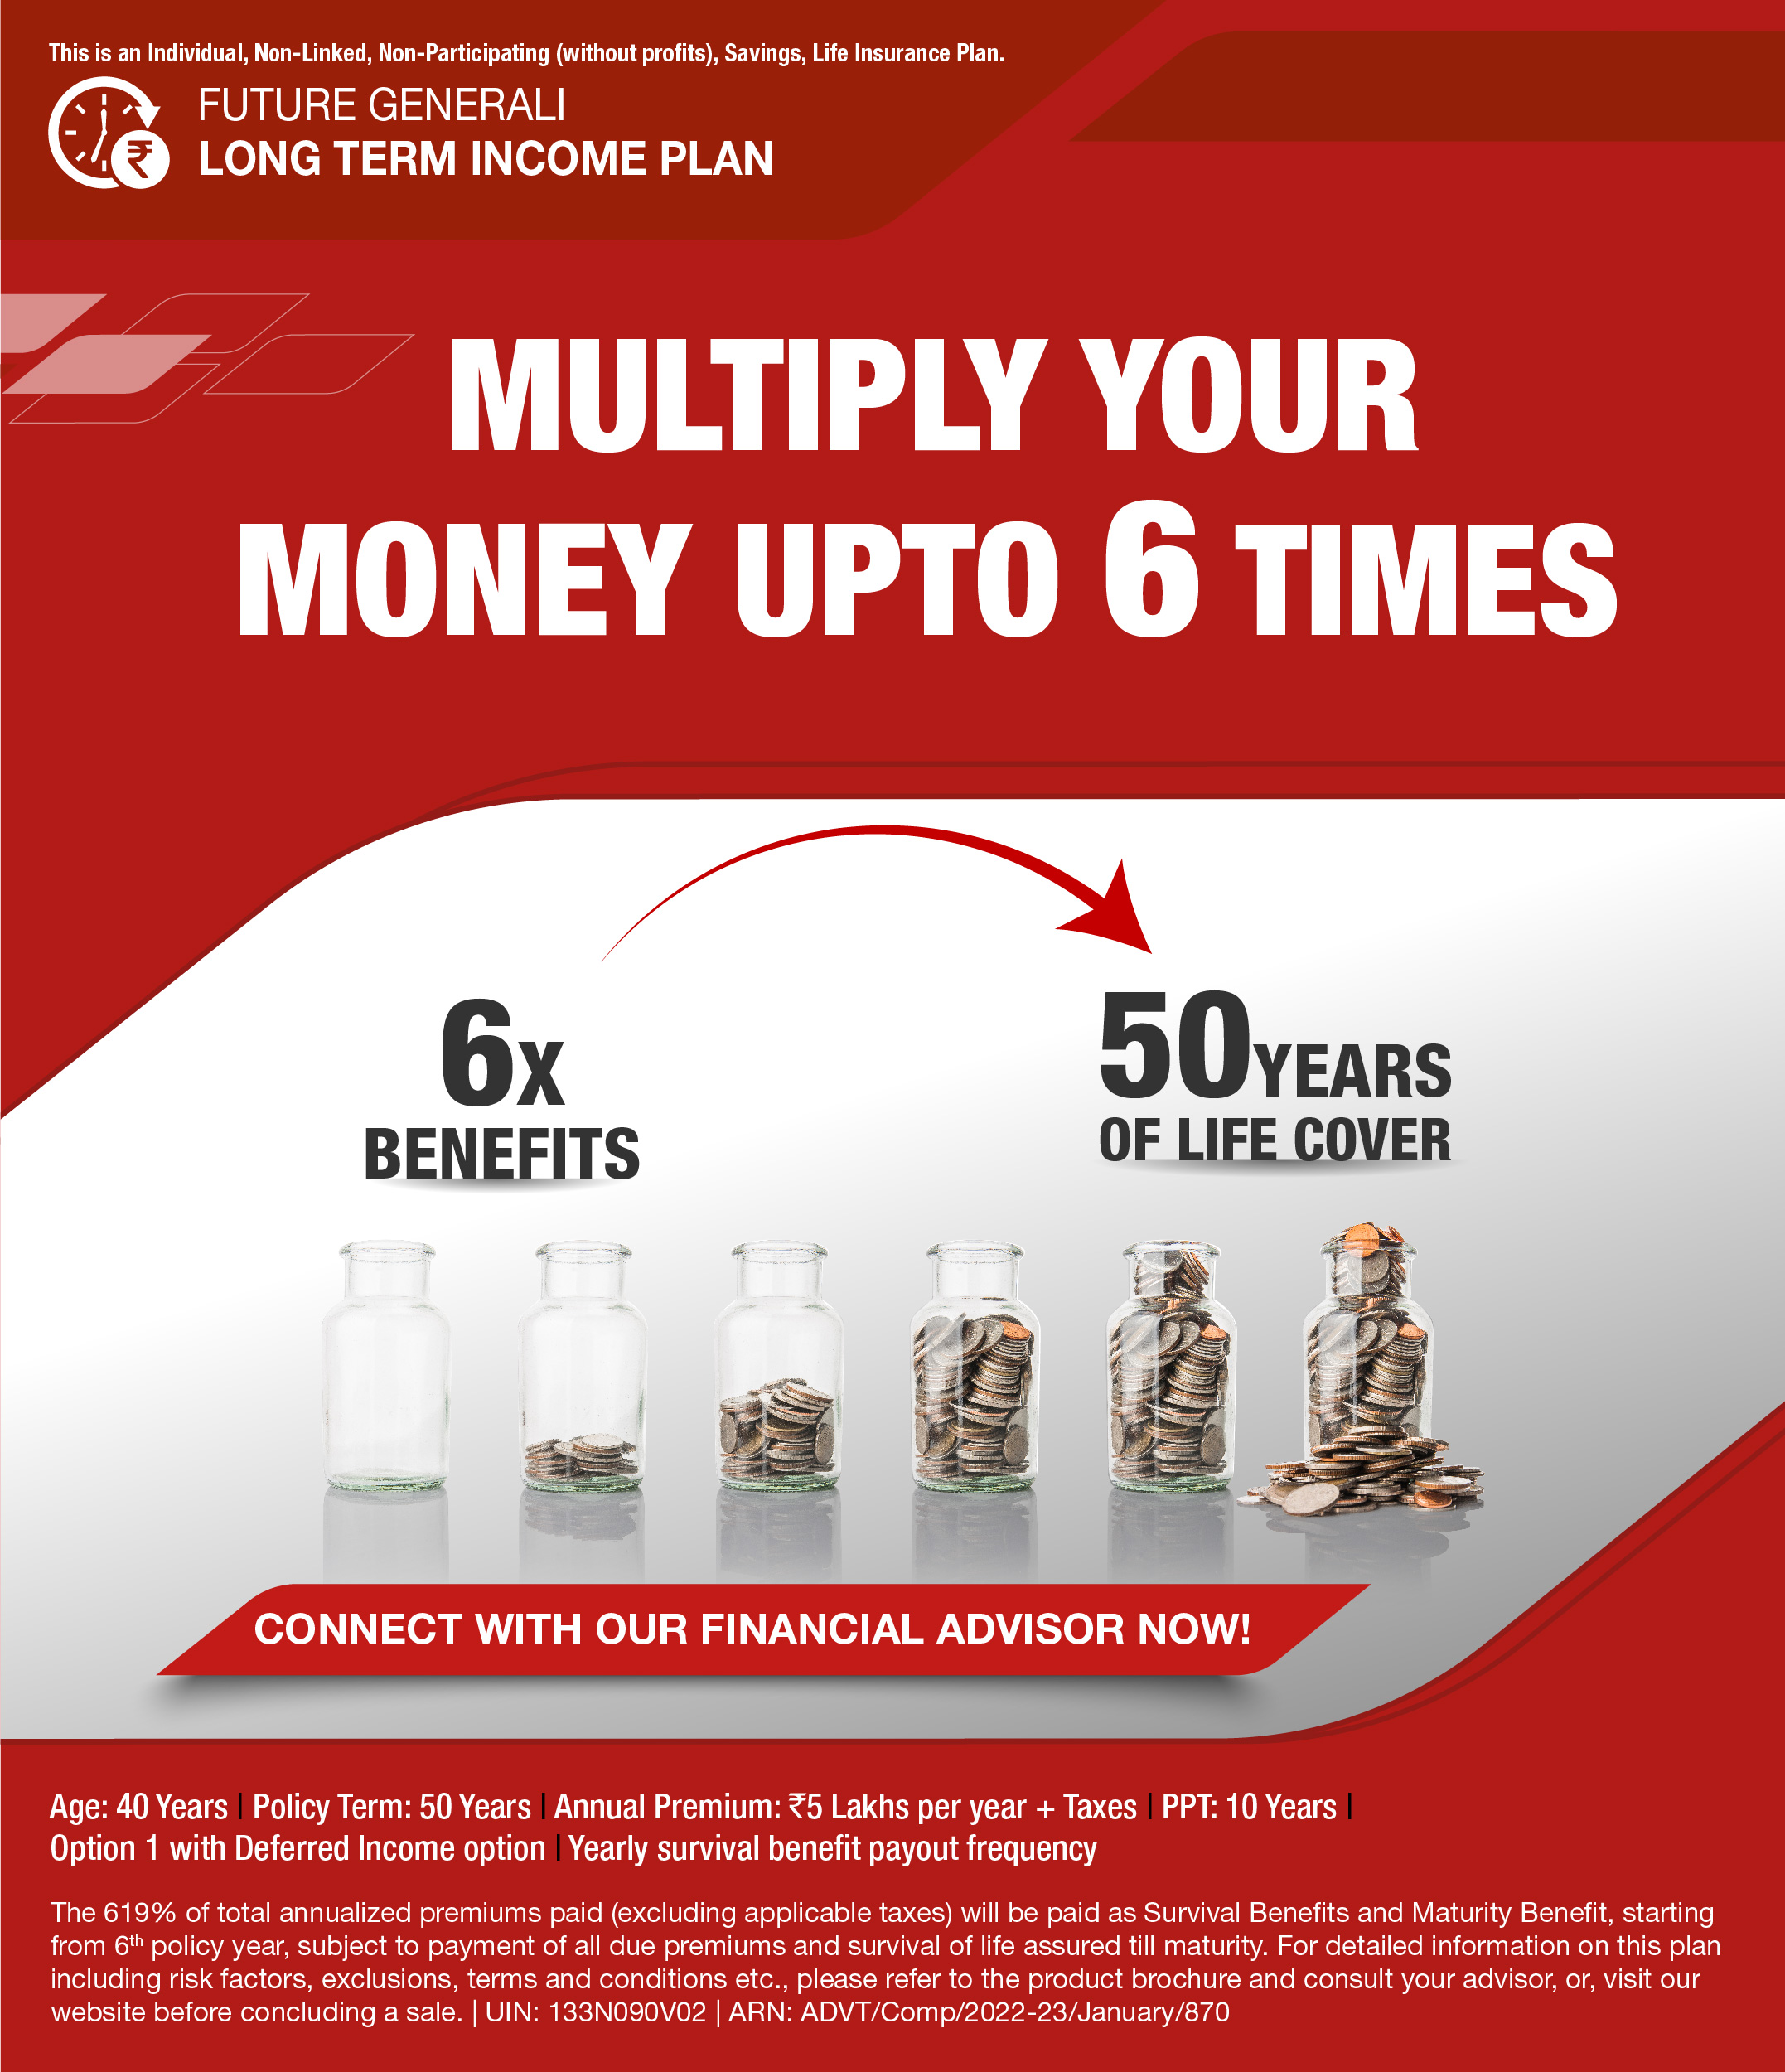 Multipy Your Money Upto 6 Times